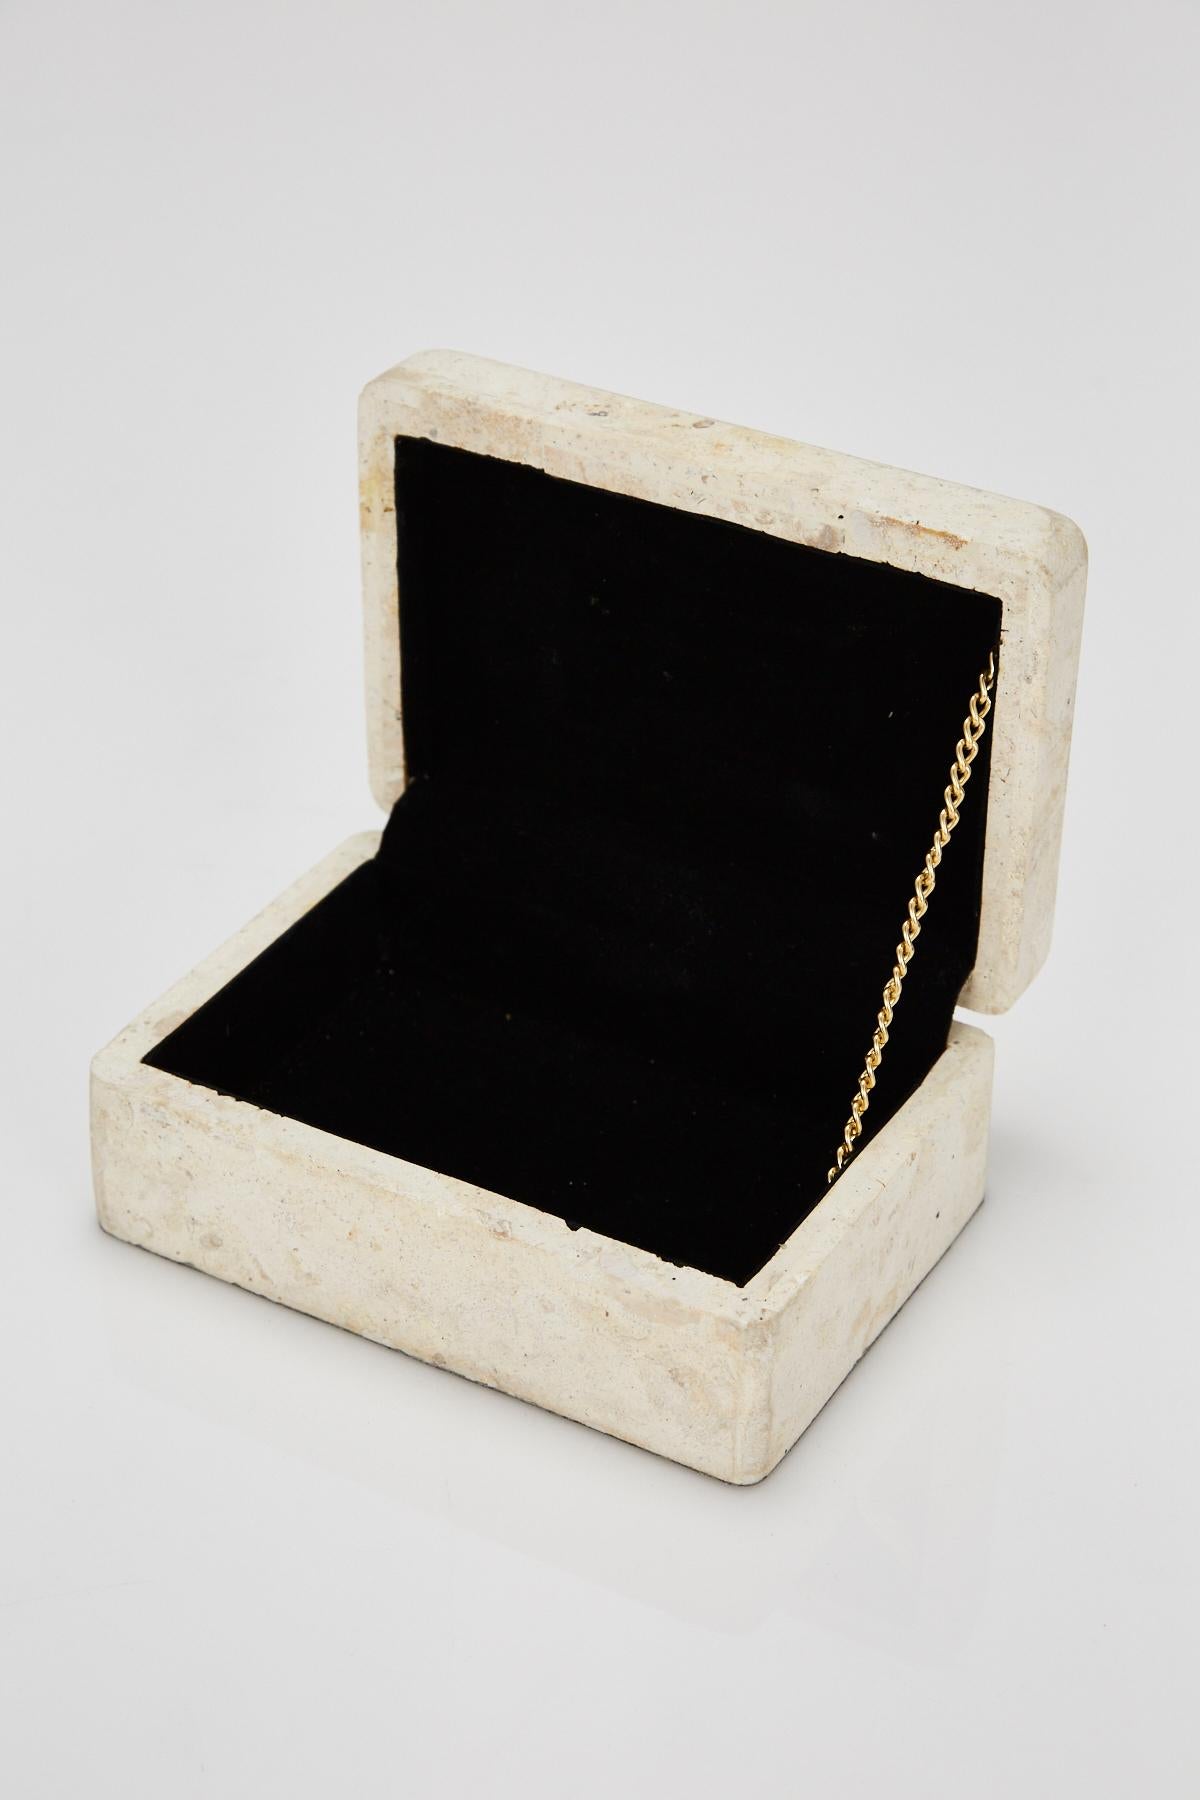 Small lidded box in matte white tessellated Mactan stone exterior and black felt-lined interior. Brass chain connects top and bottom. Underside lined in black felt. Simple rectangular form with lightly curved edges.